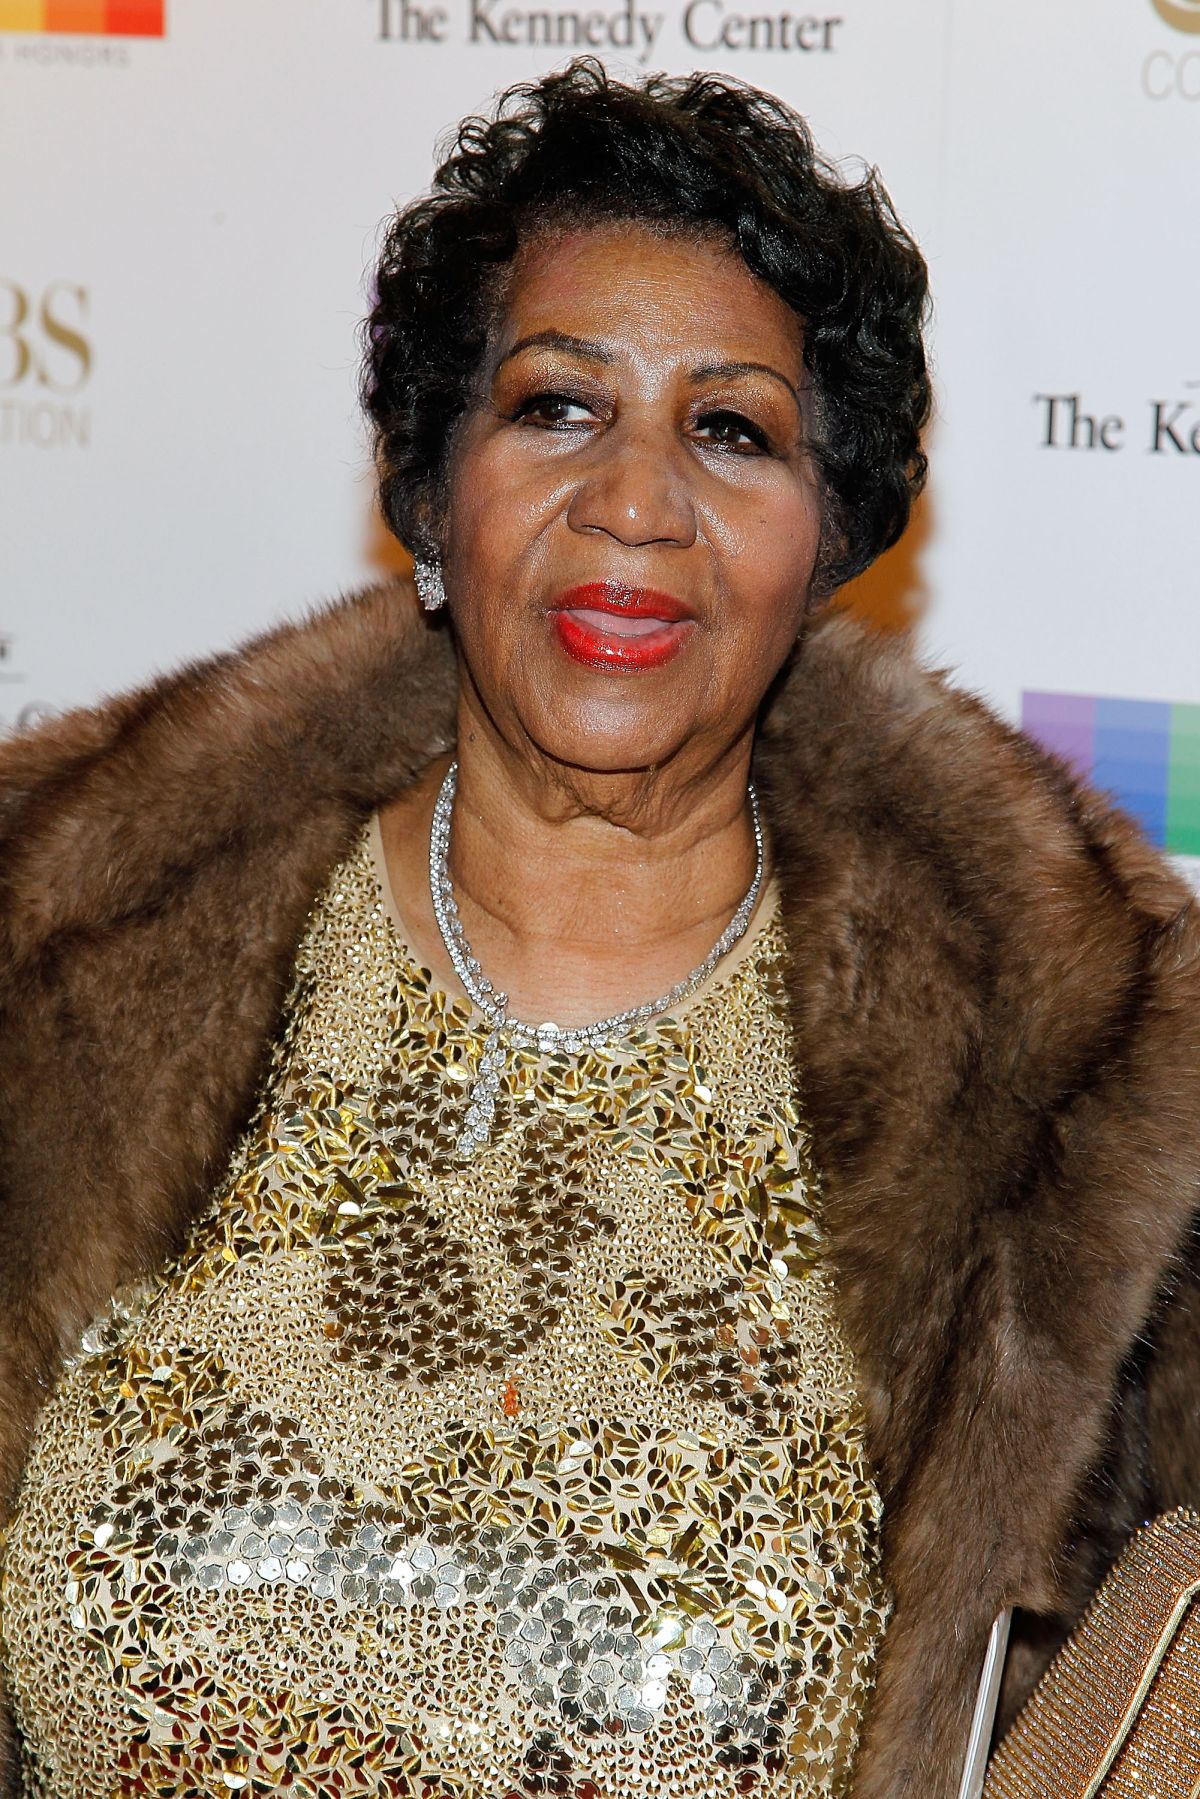 Aretha Franklin Timeline Photos Of Queen Of Soul's Life, Career